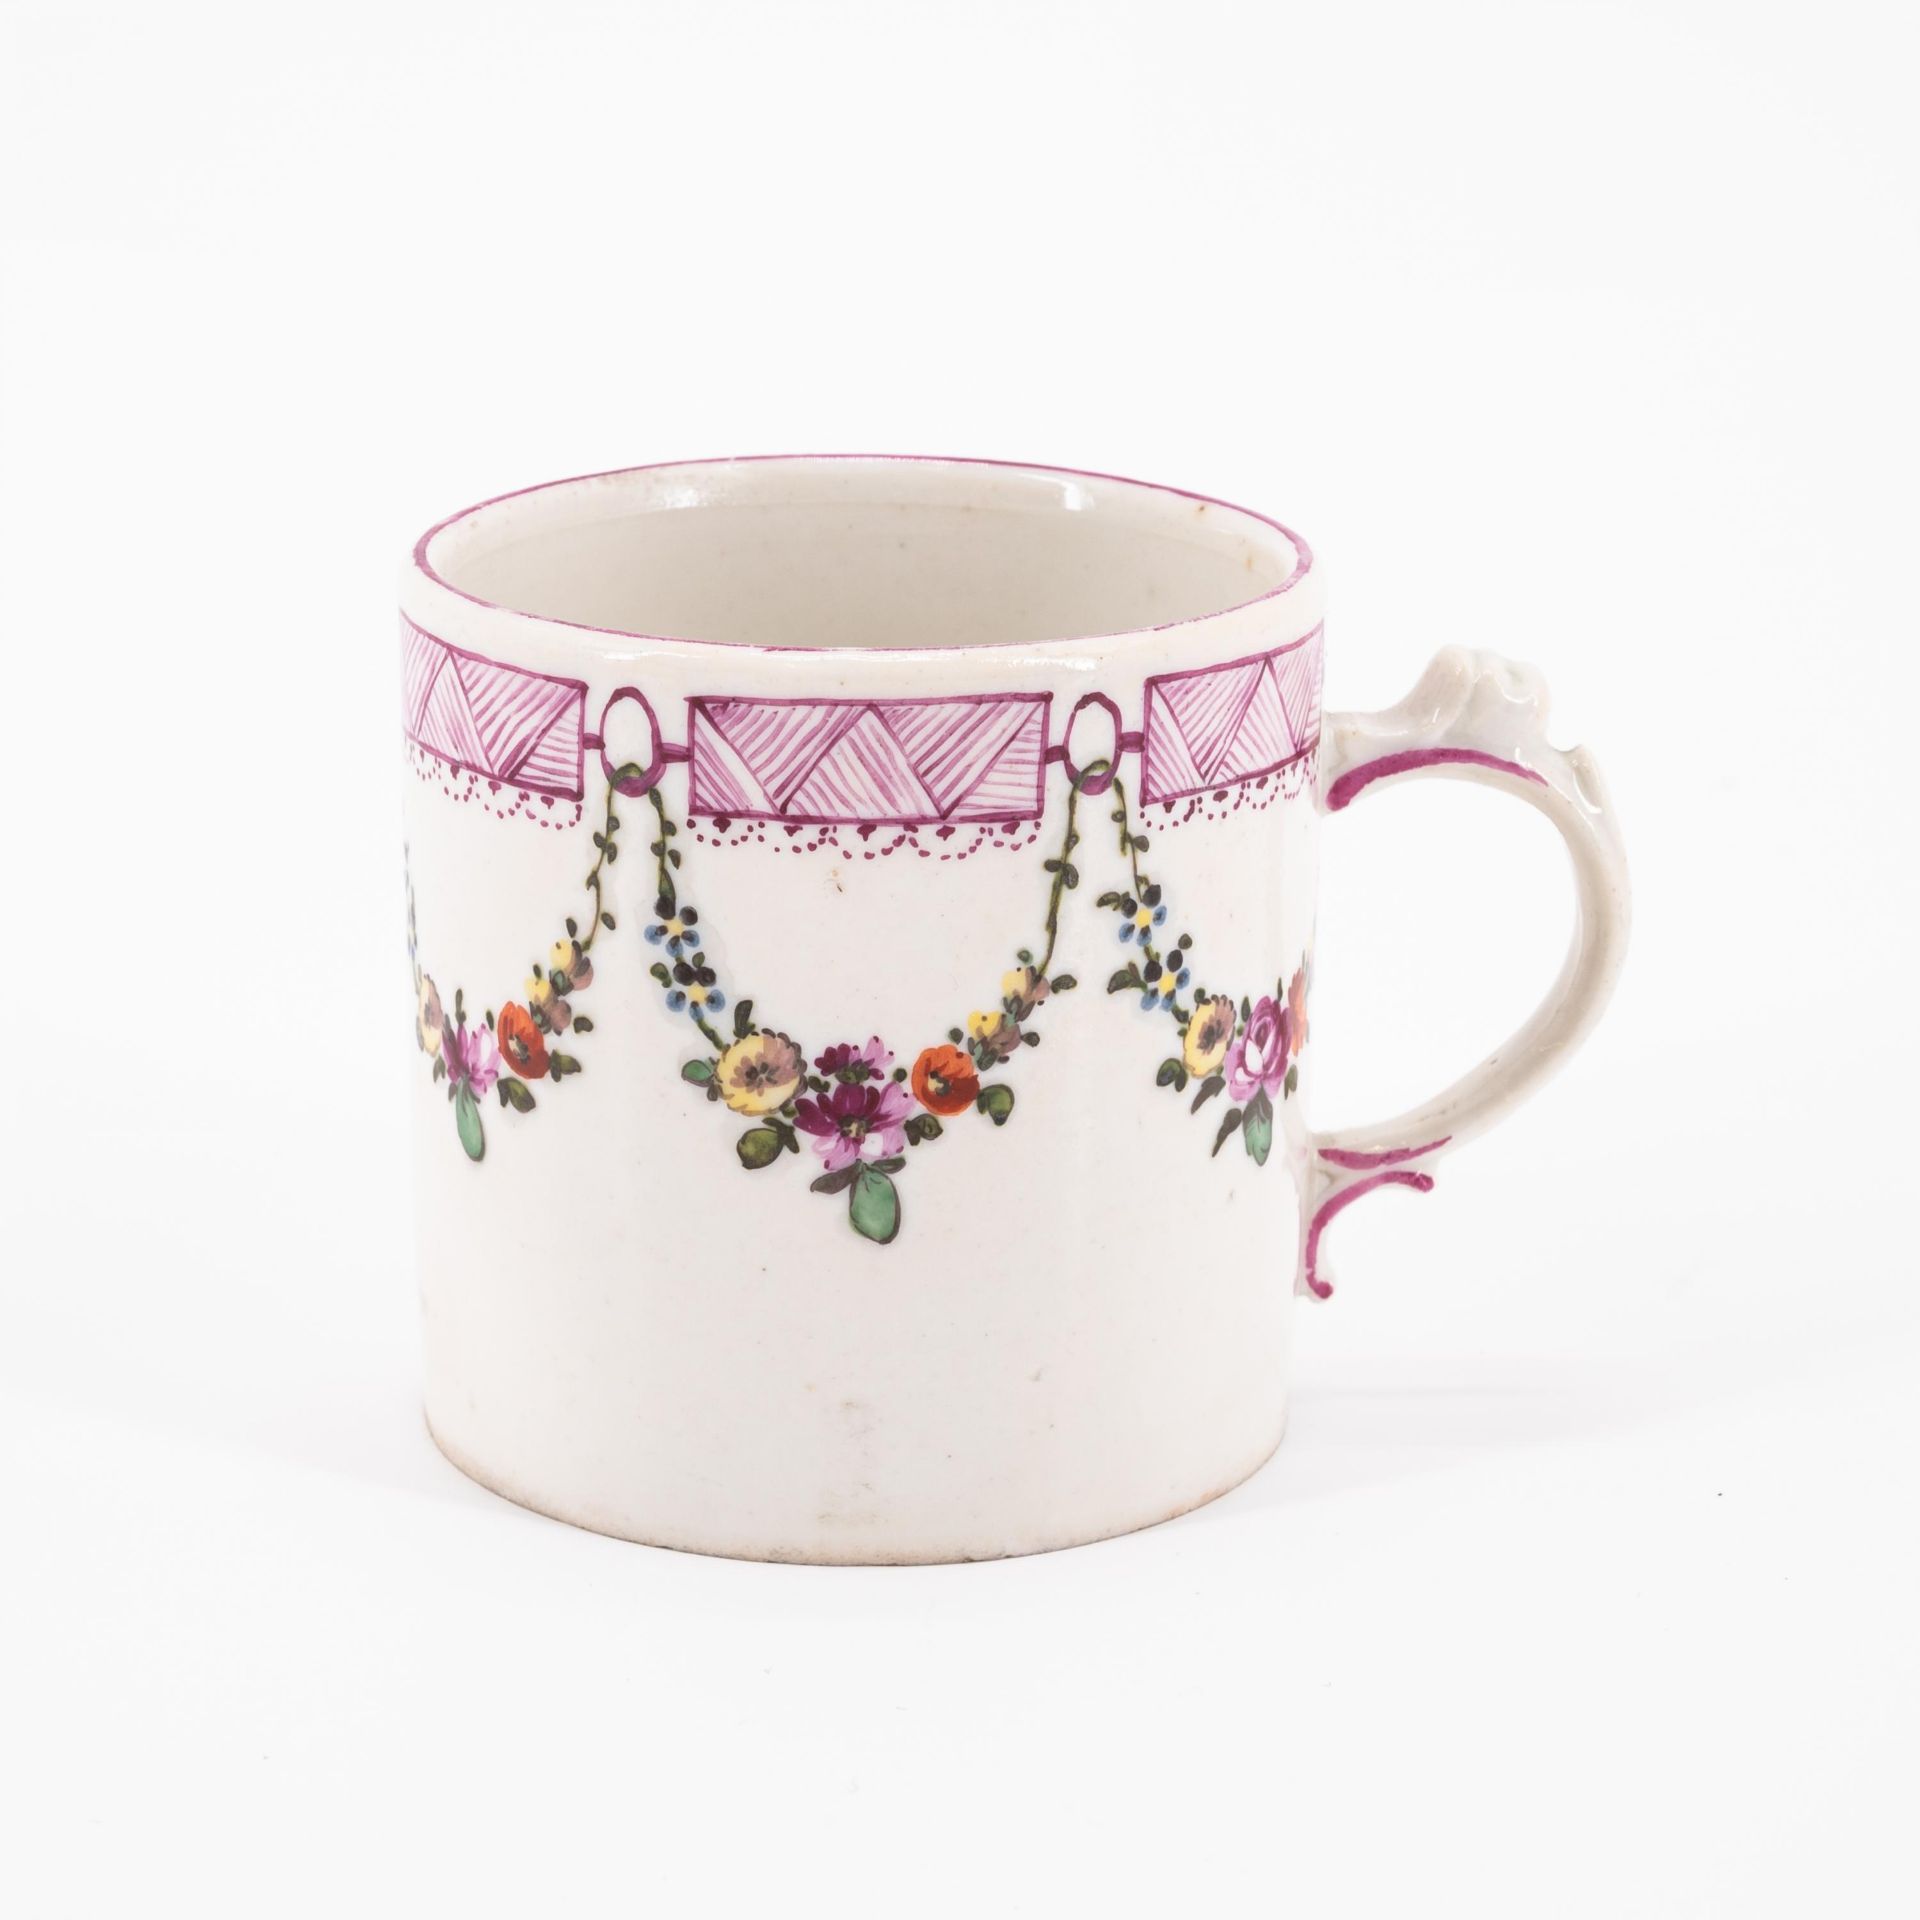 PORCELAIN SLOP BOWL, THREE CUPS AND SAUCERS WITH FIGURATIVE AND FLORAL DECOR - Image 10 of 22